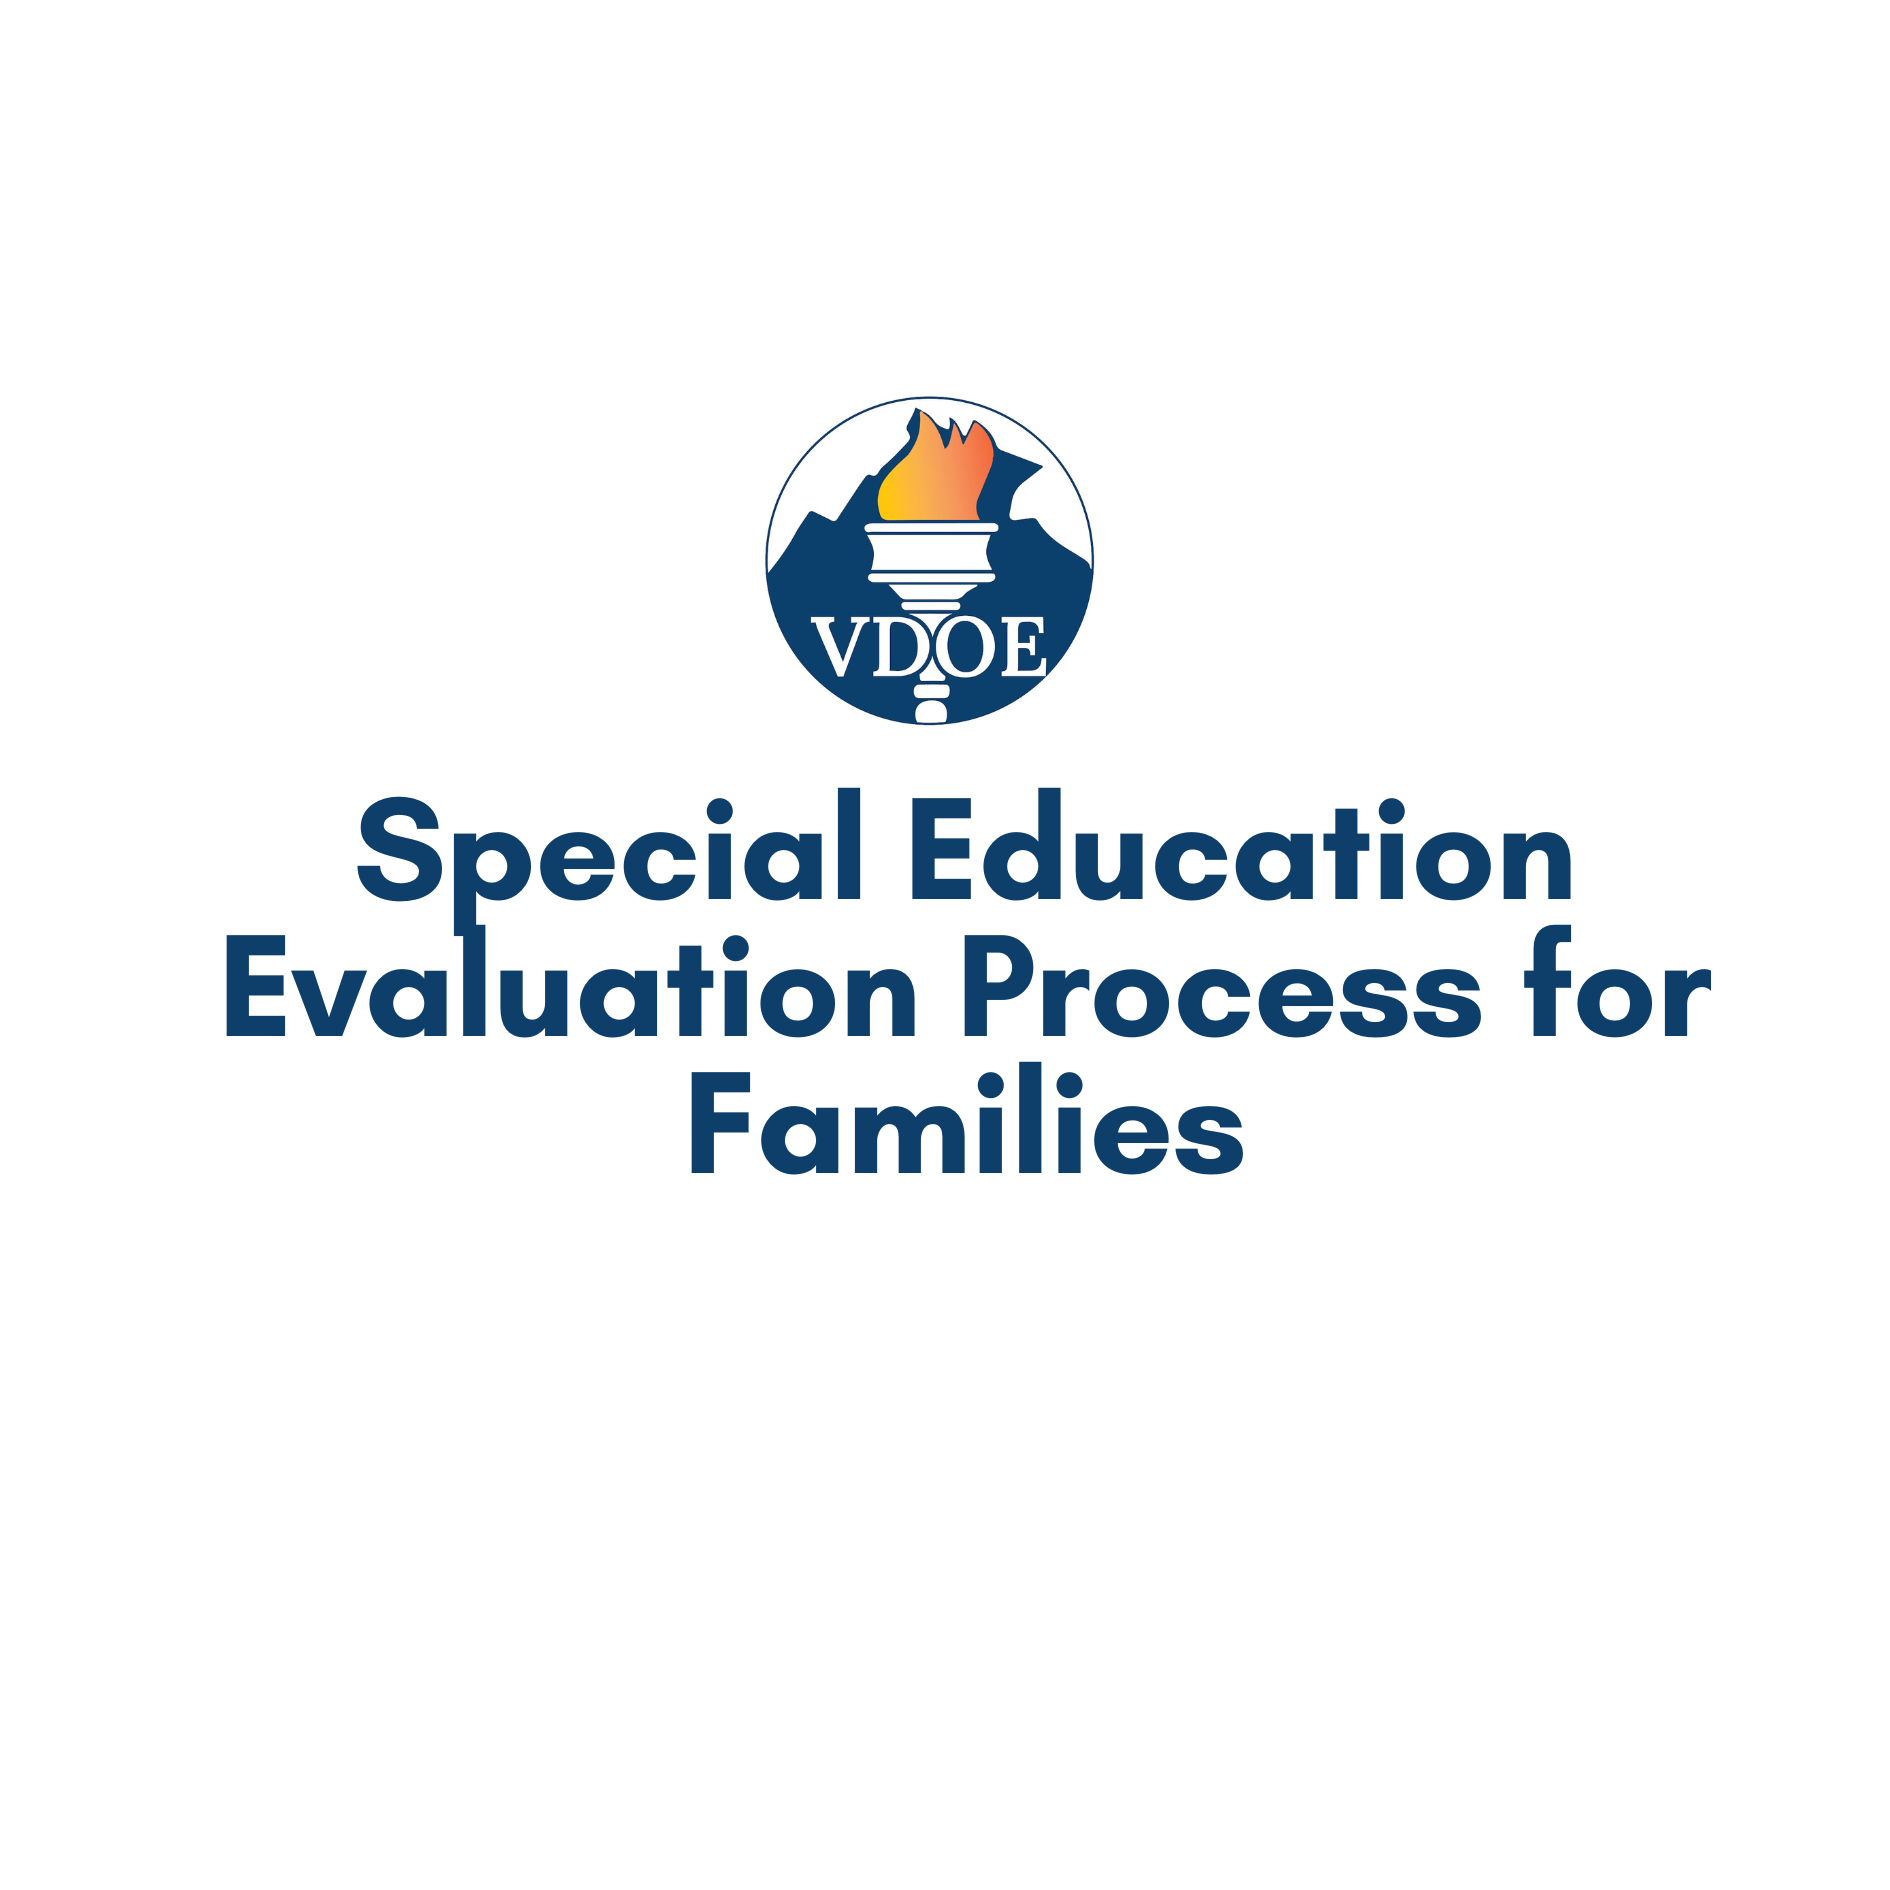 VDOE’s Video Guide to the Special Education Evaluation Process for Families